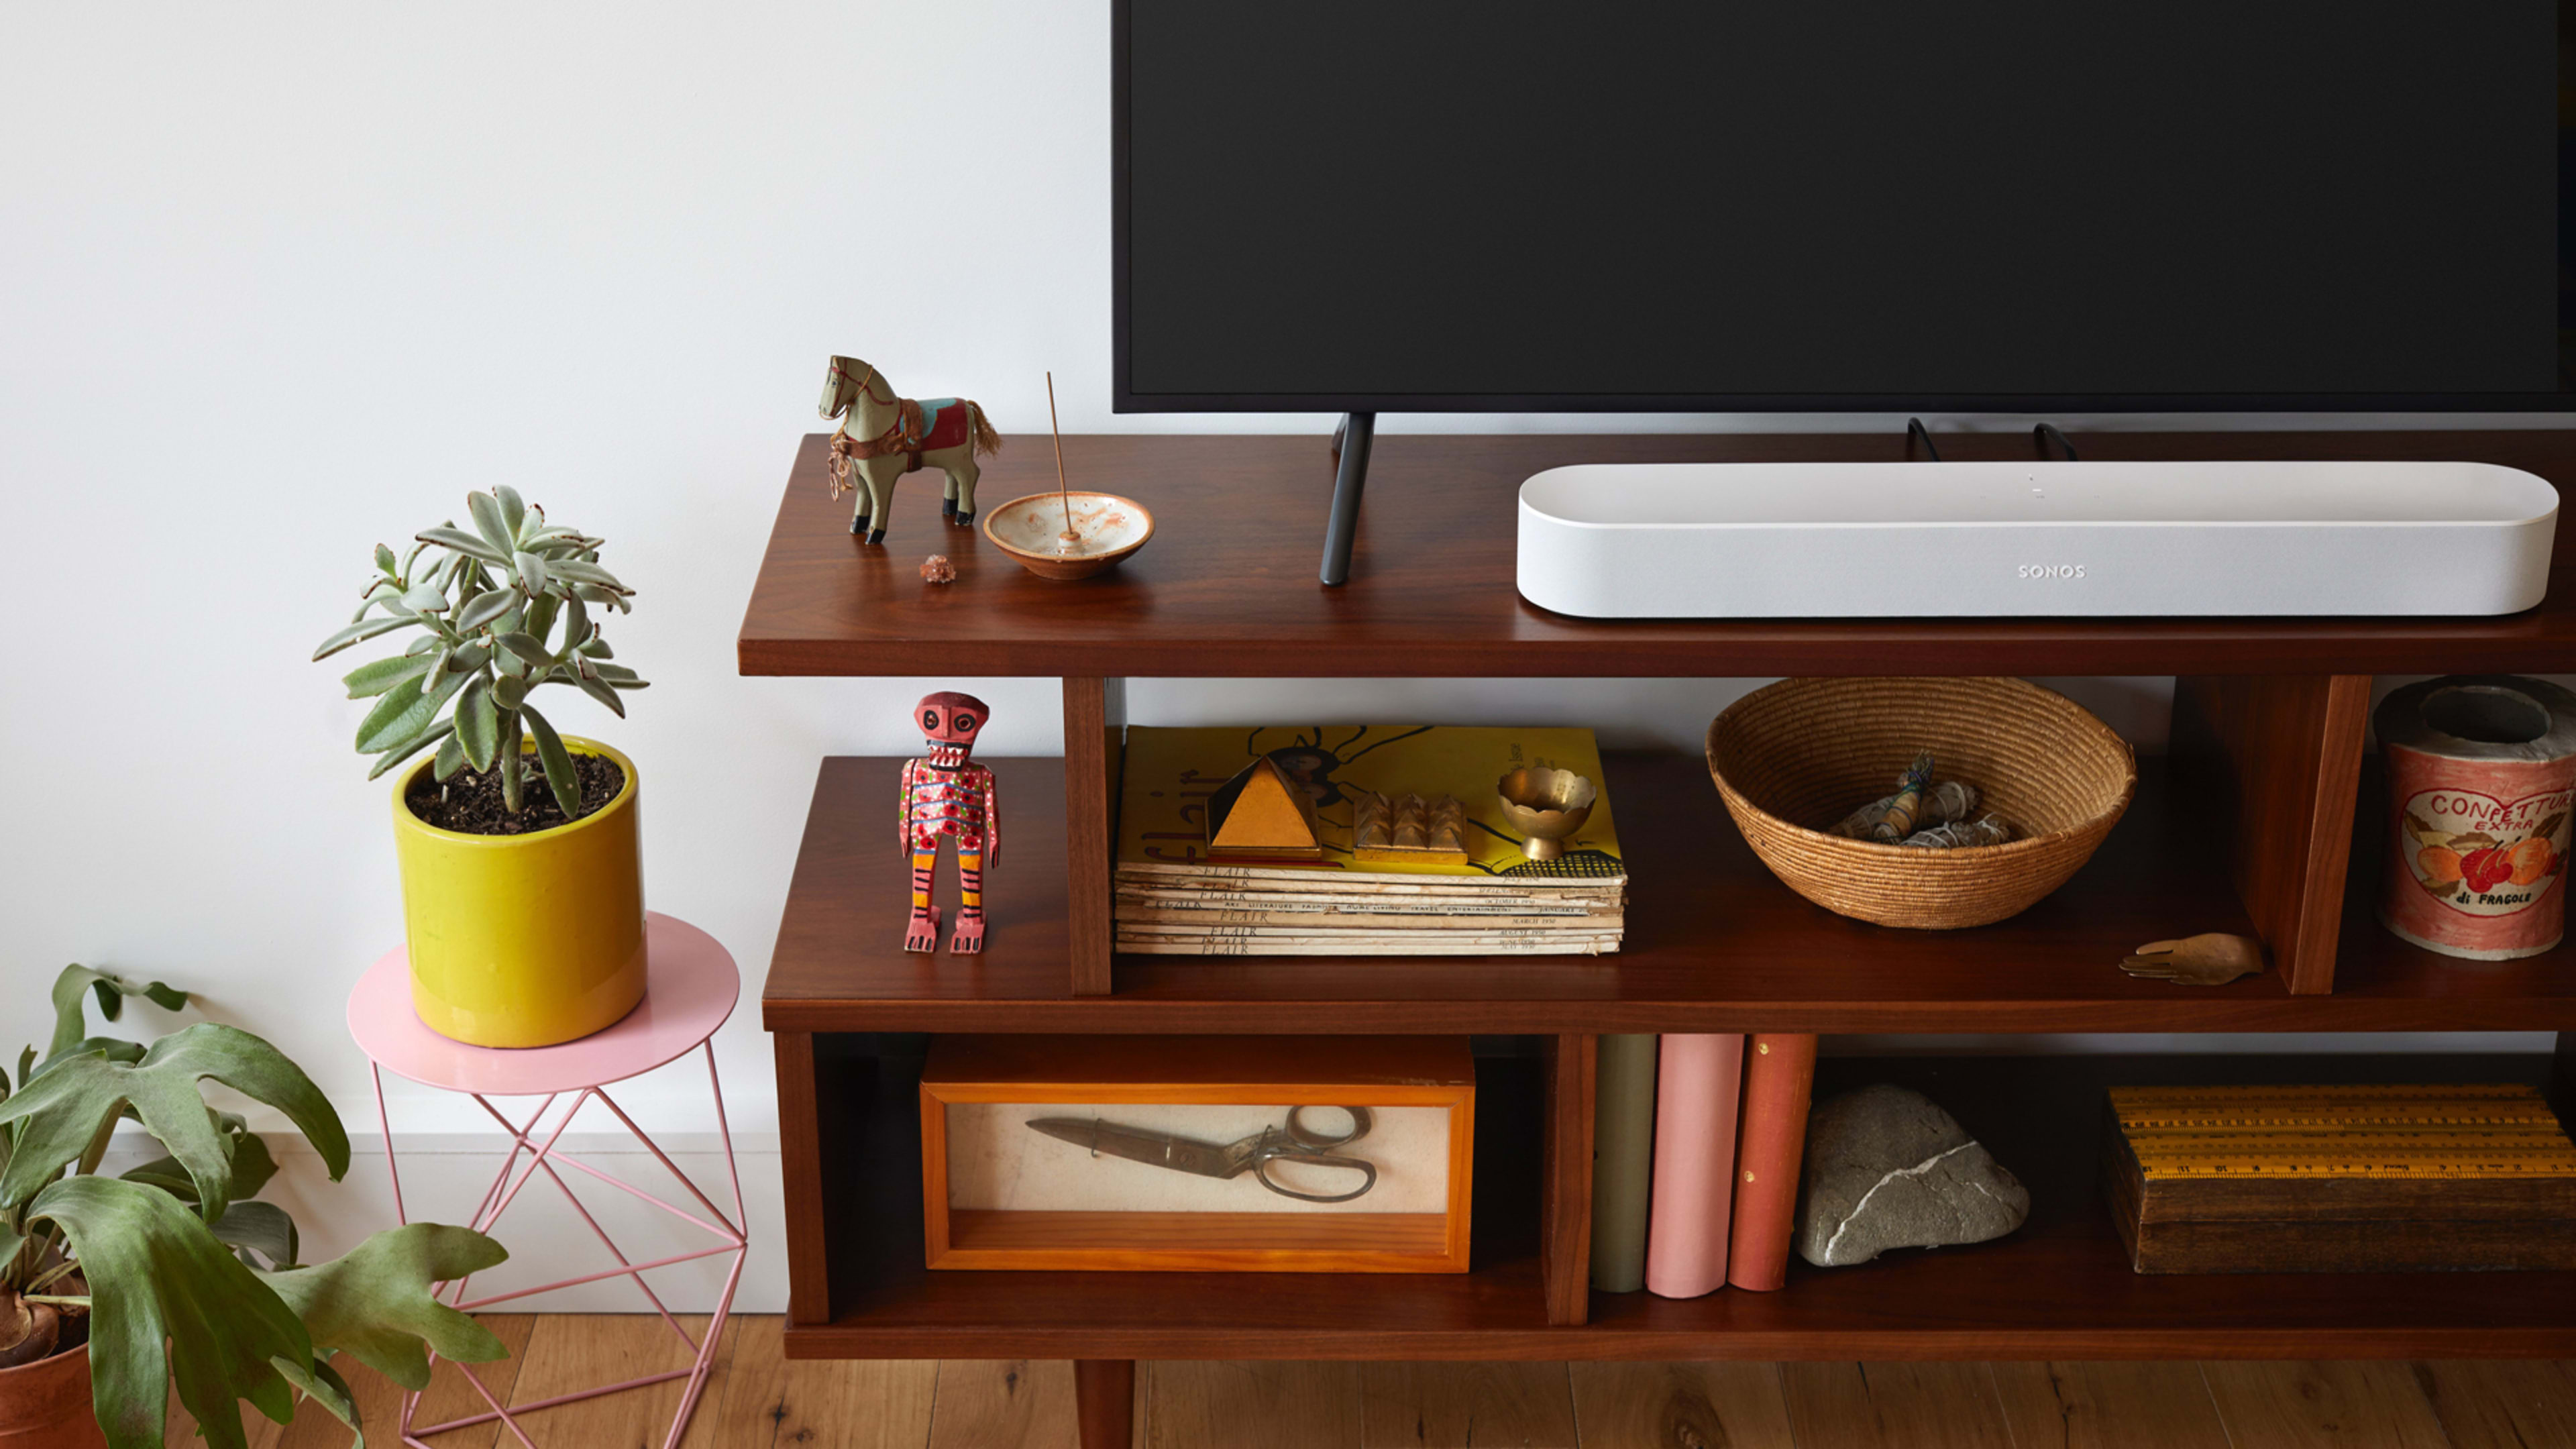 The Google Assistant has finally come to Sonos speakers